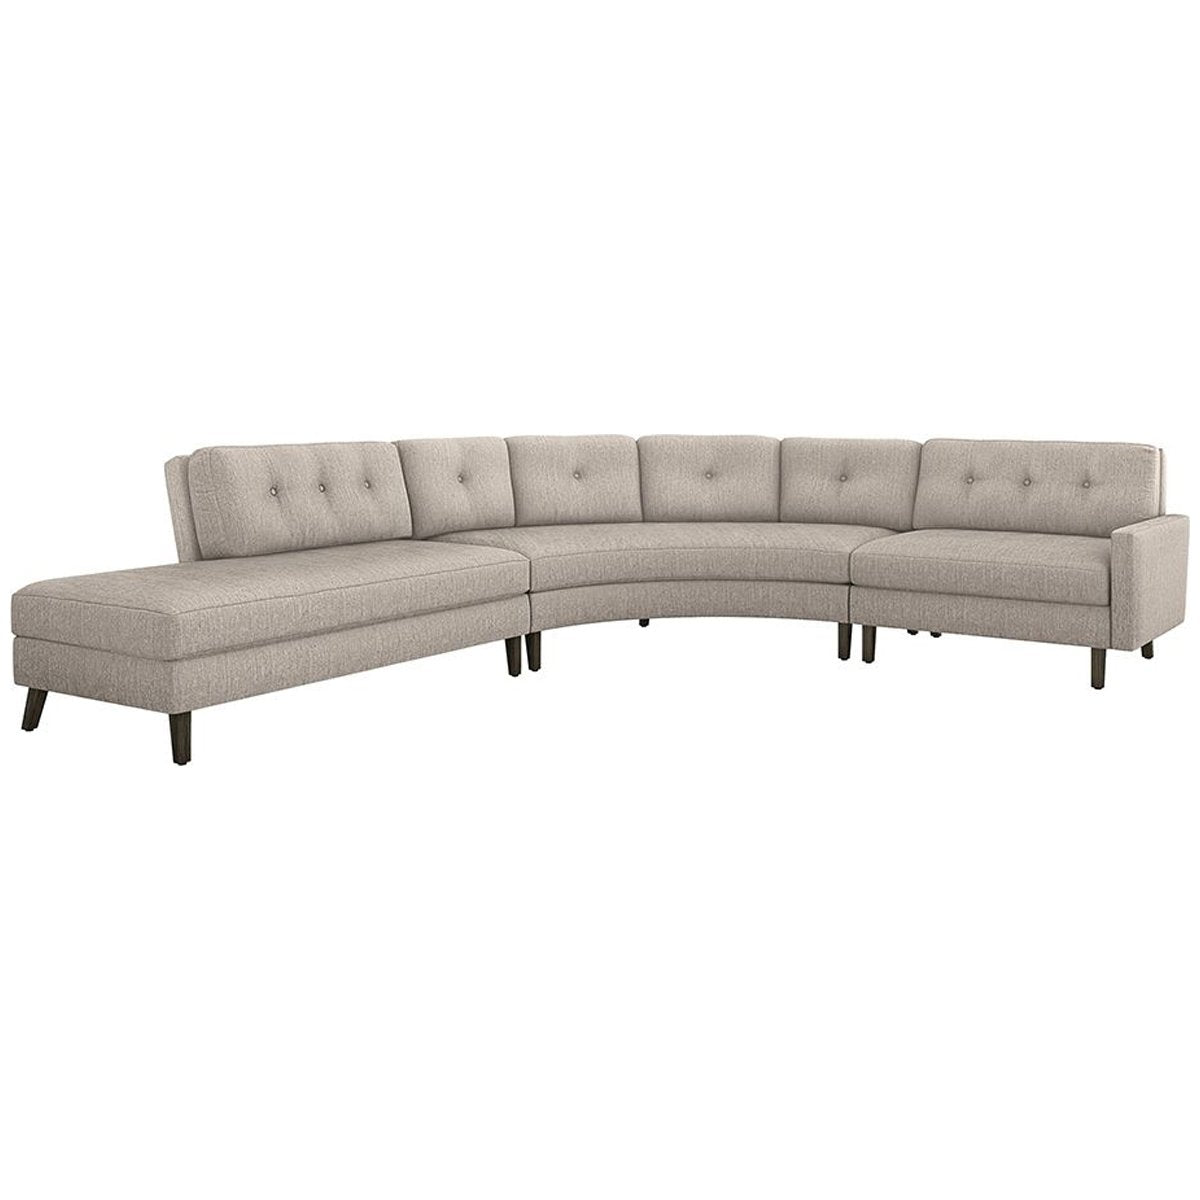 Interlude Home Aventura Luxe Chenille Chaise 3-Piece Sectional